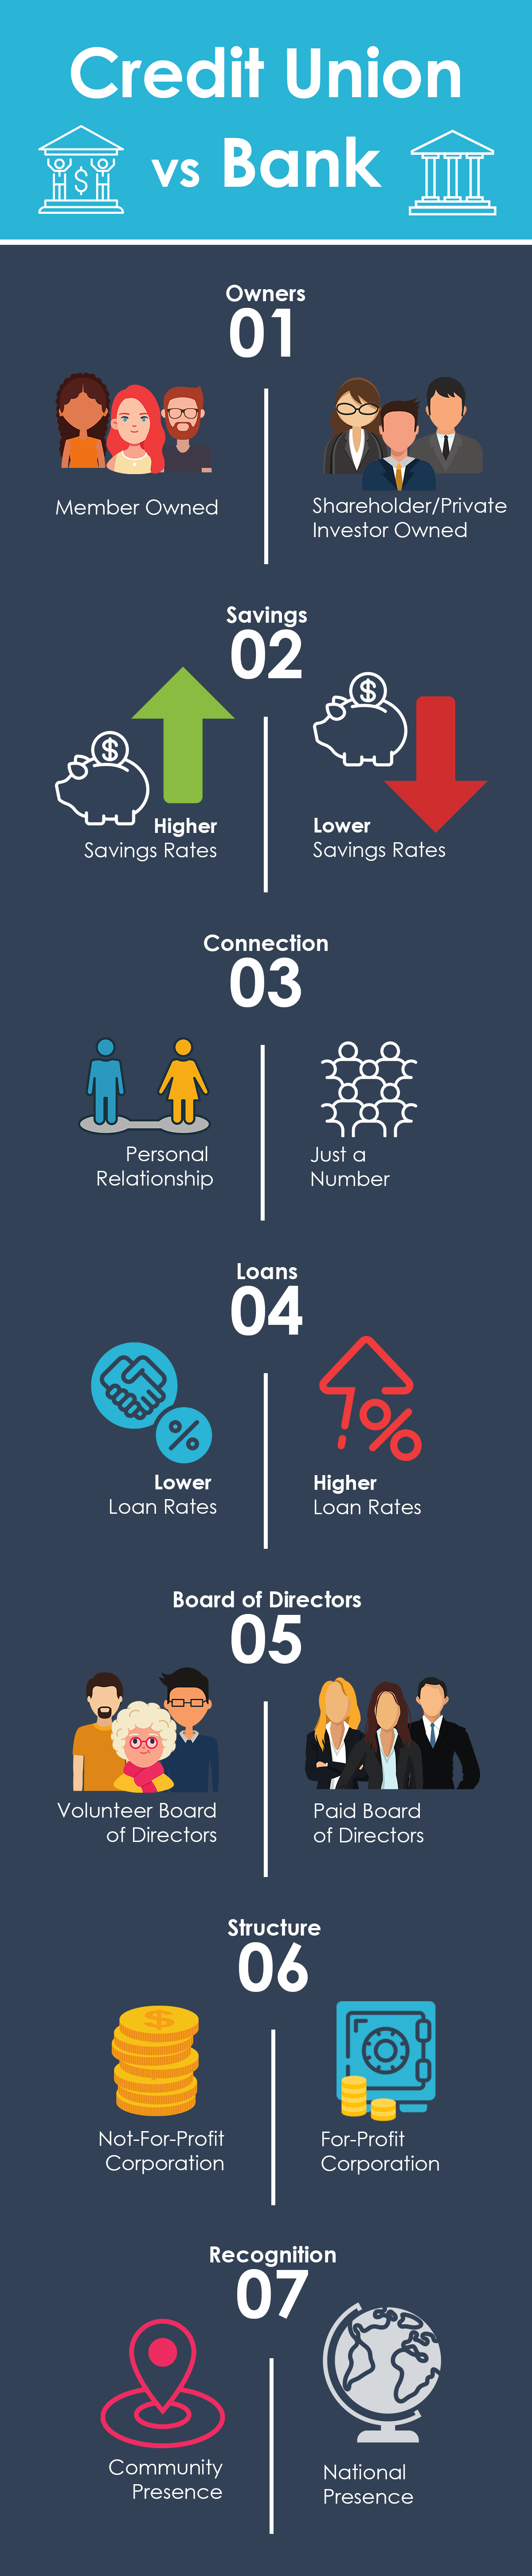 Infographic on similarities and differences between banks and credit unions